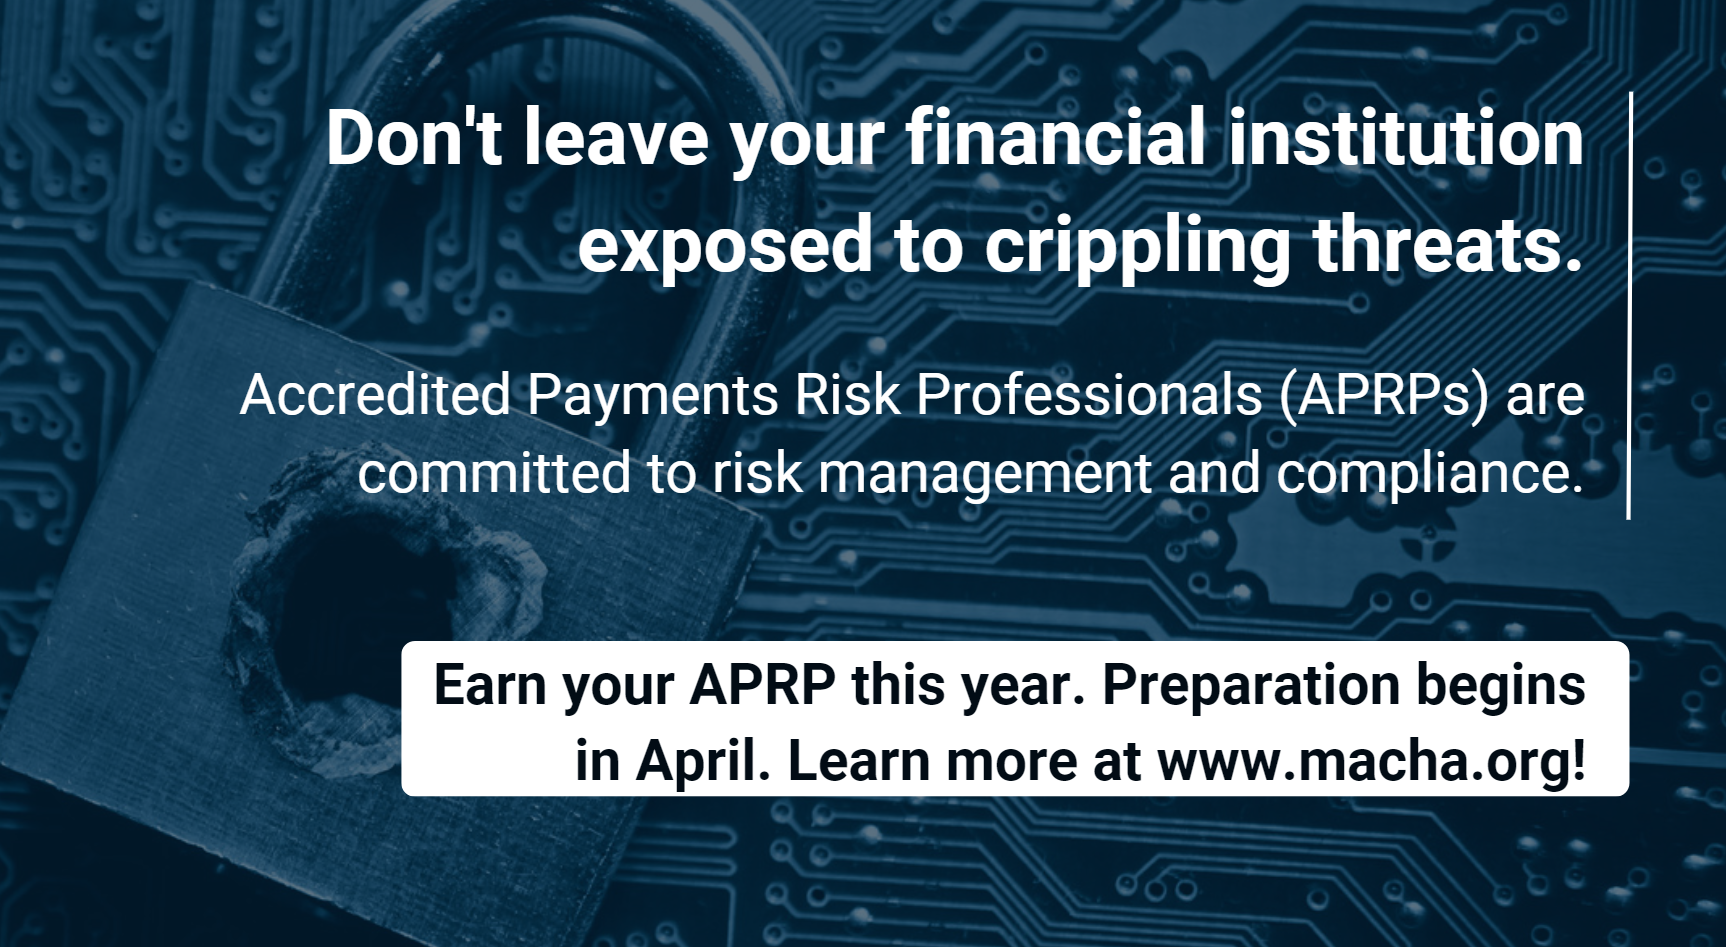 Stop Threats Faster, Become an Accredited Payments Risk Professional